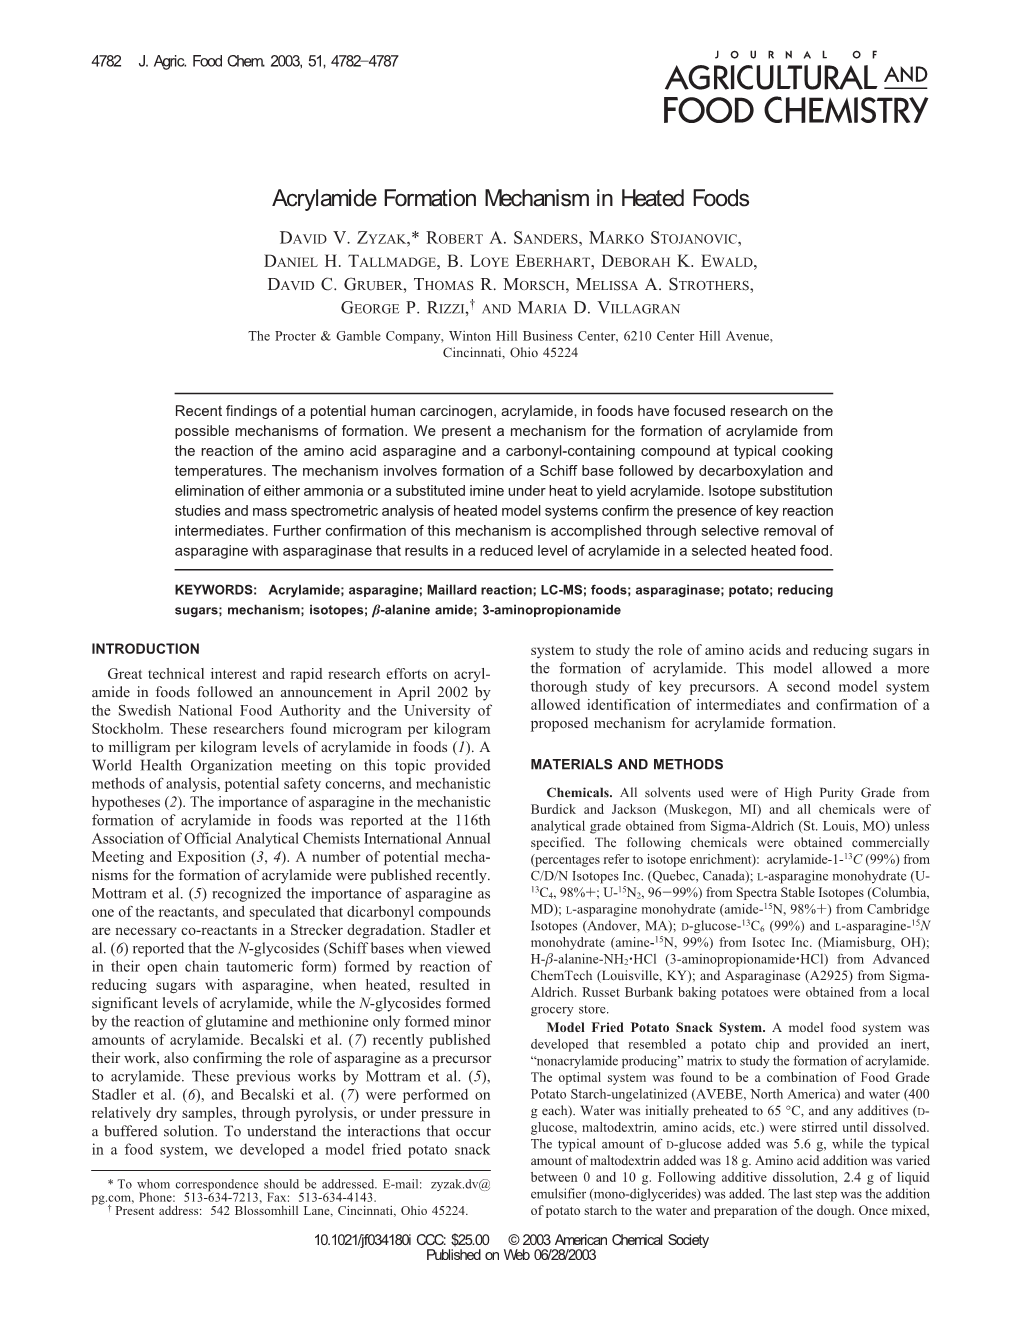 Acrylamide Formation Mechanism in Heated Foods